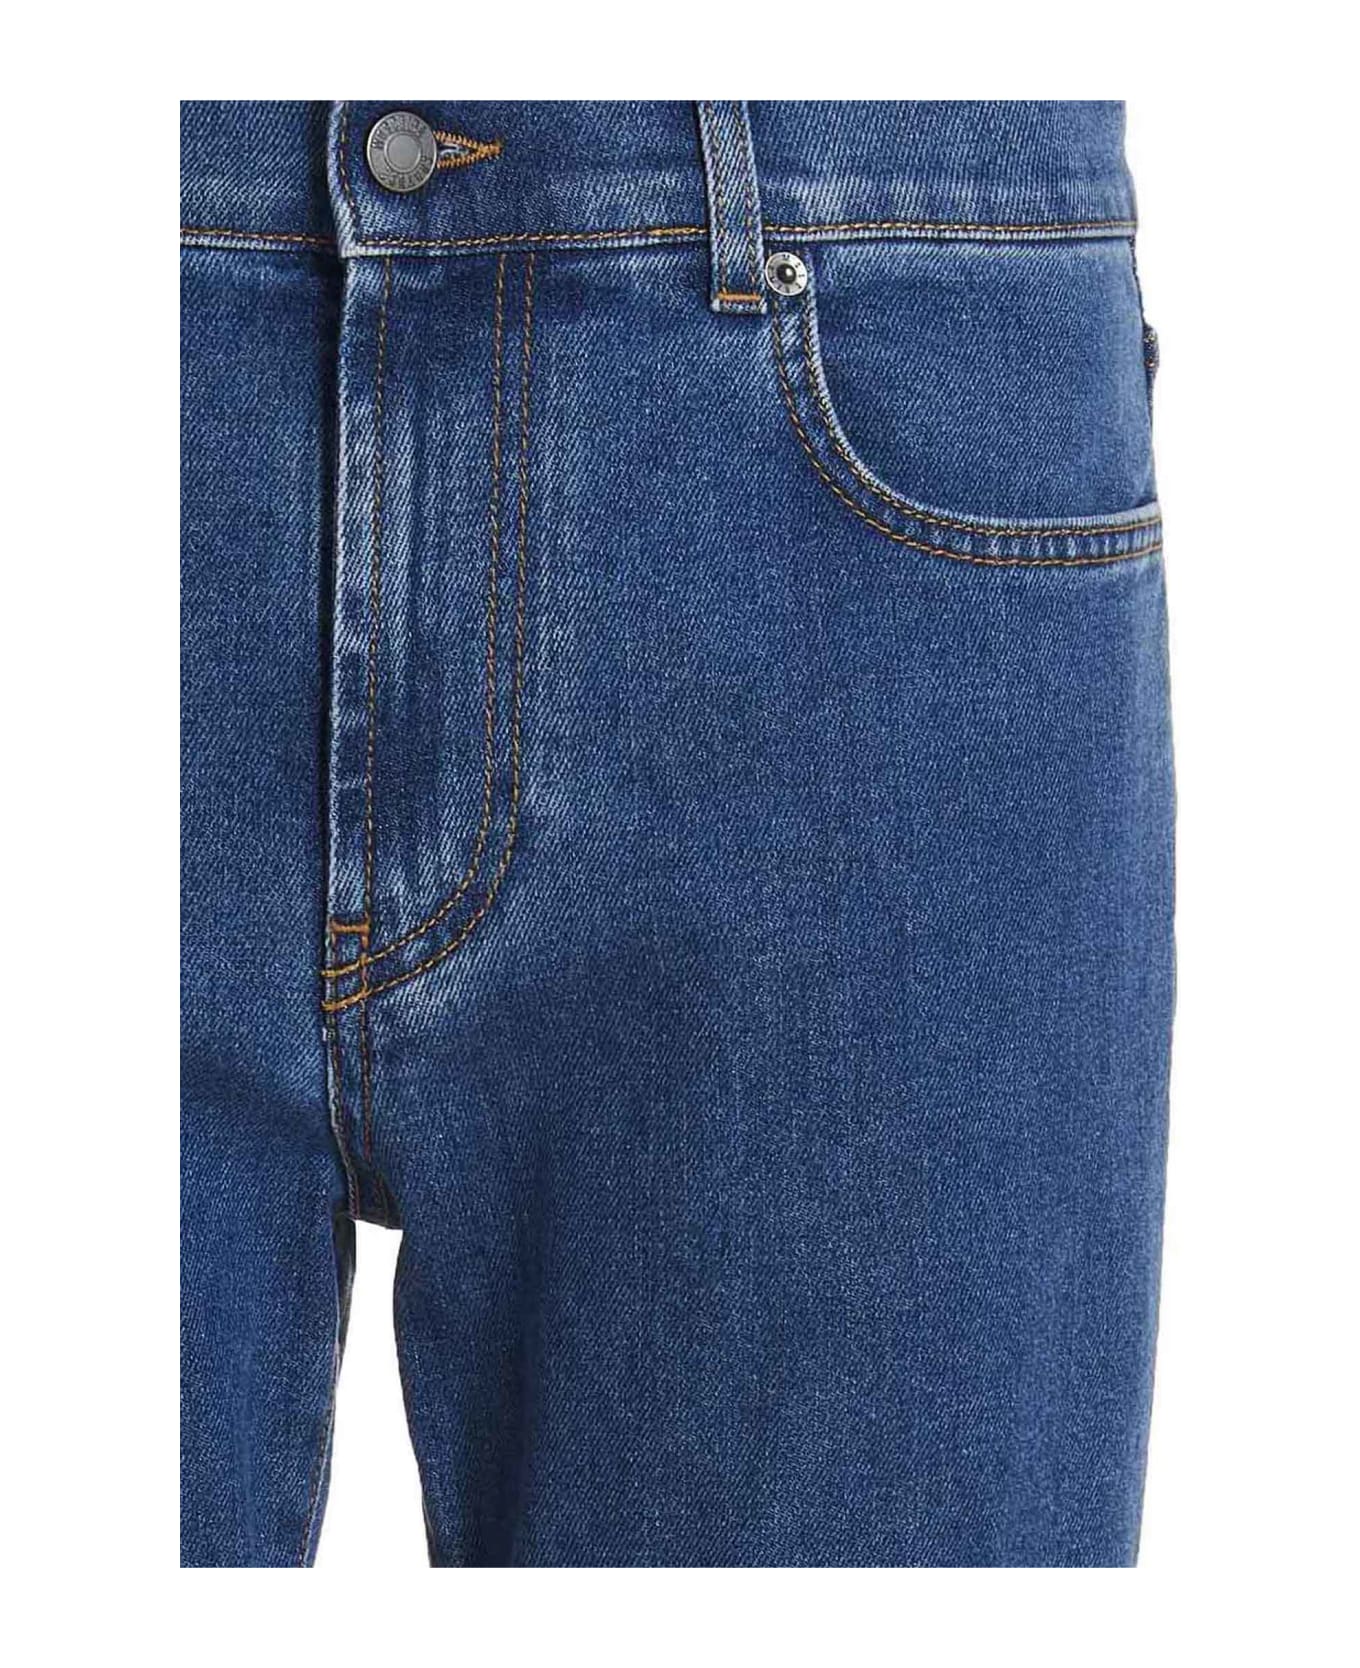 Moschino 'teddy' Jeans - Blue